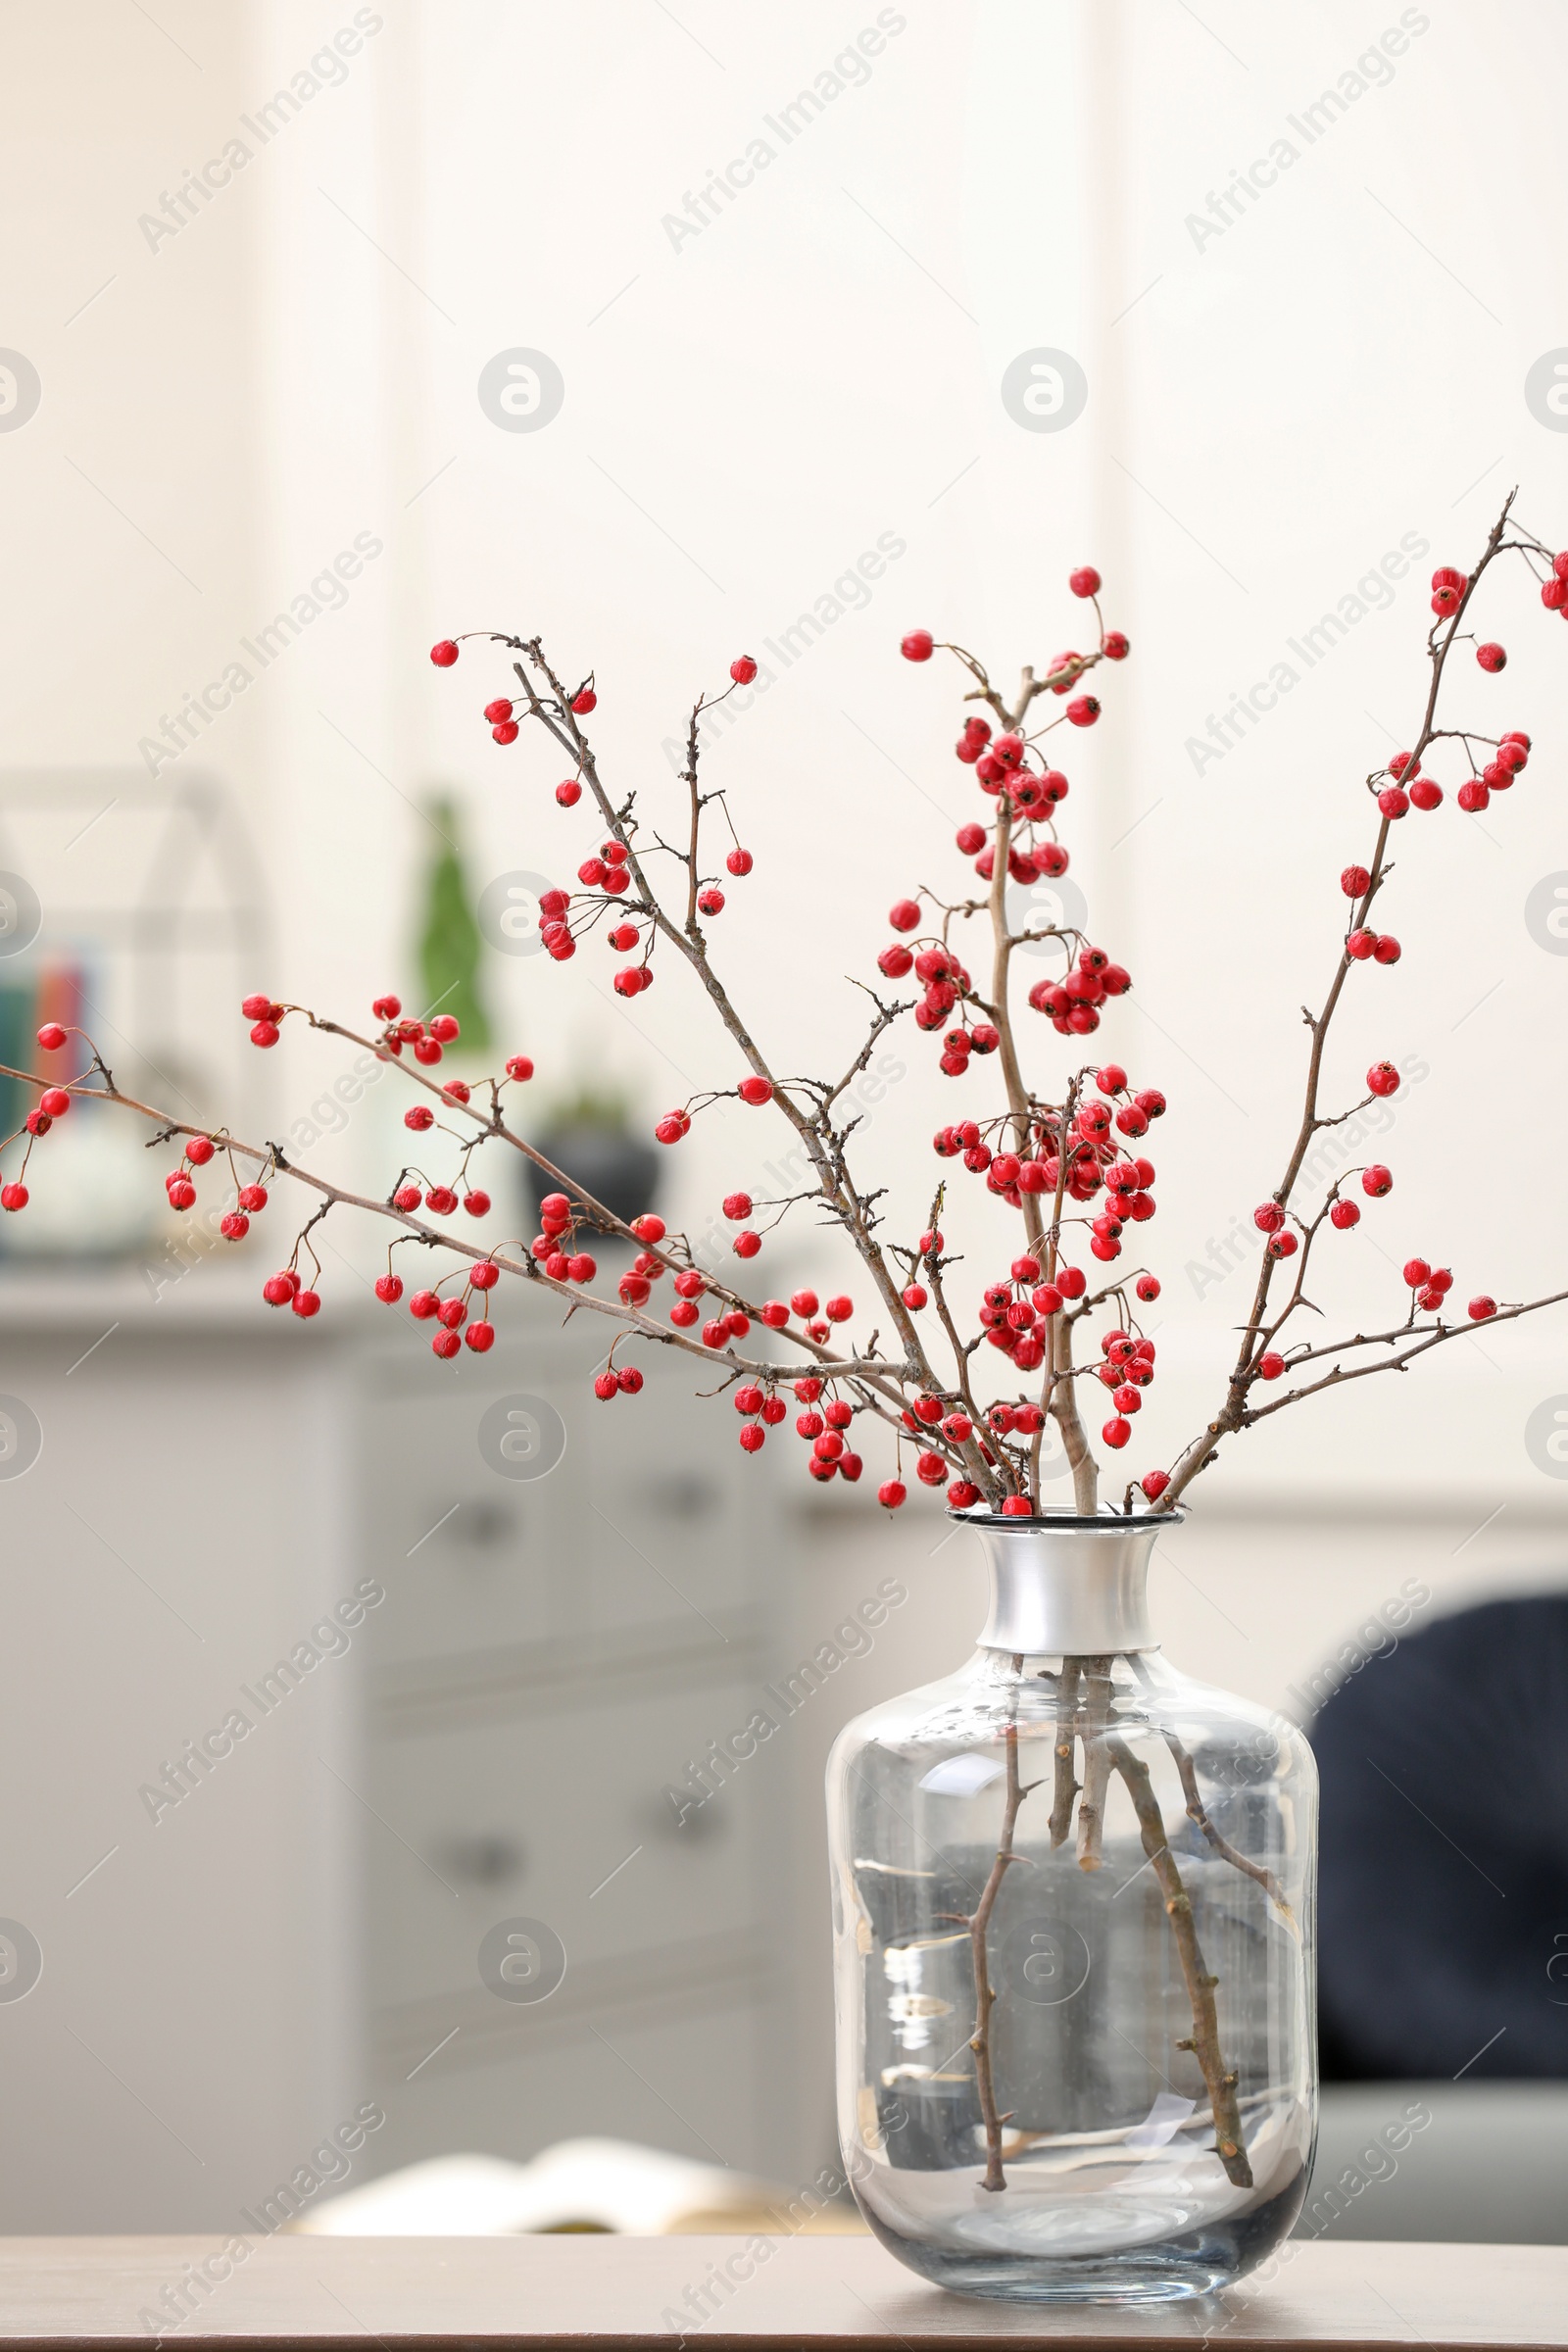 Photo of Hawthorn branches with red berries in vase on table indoors